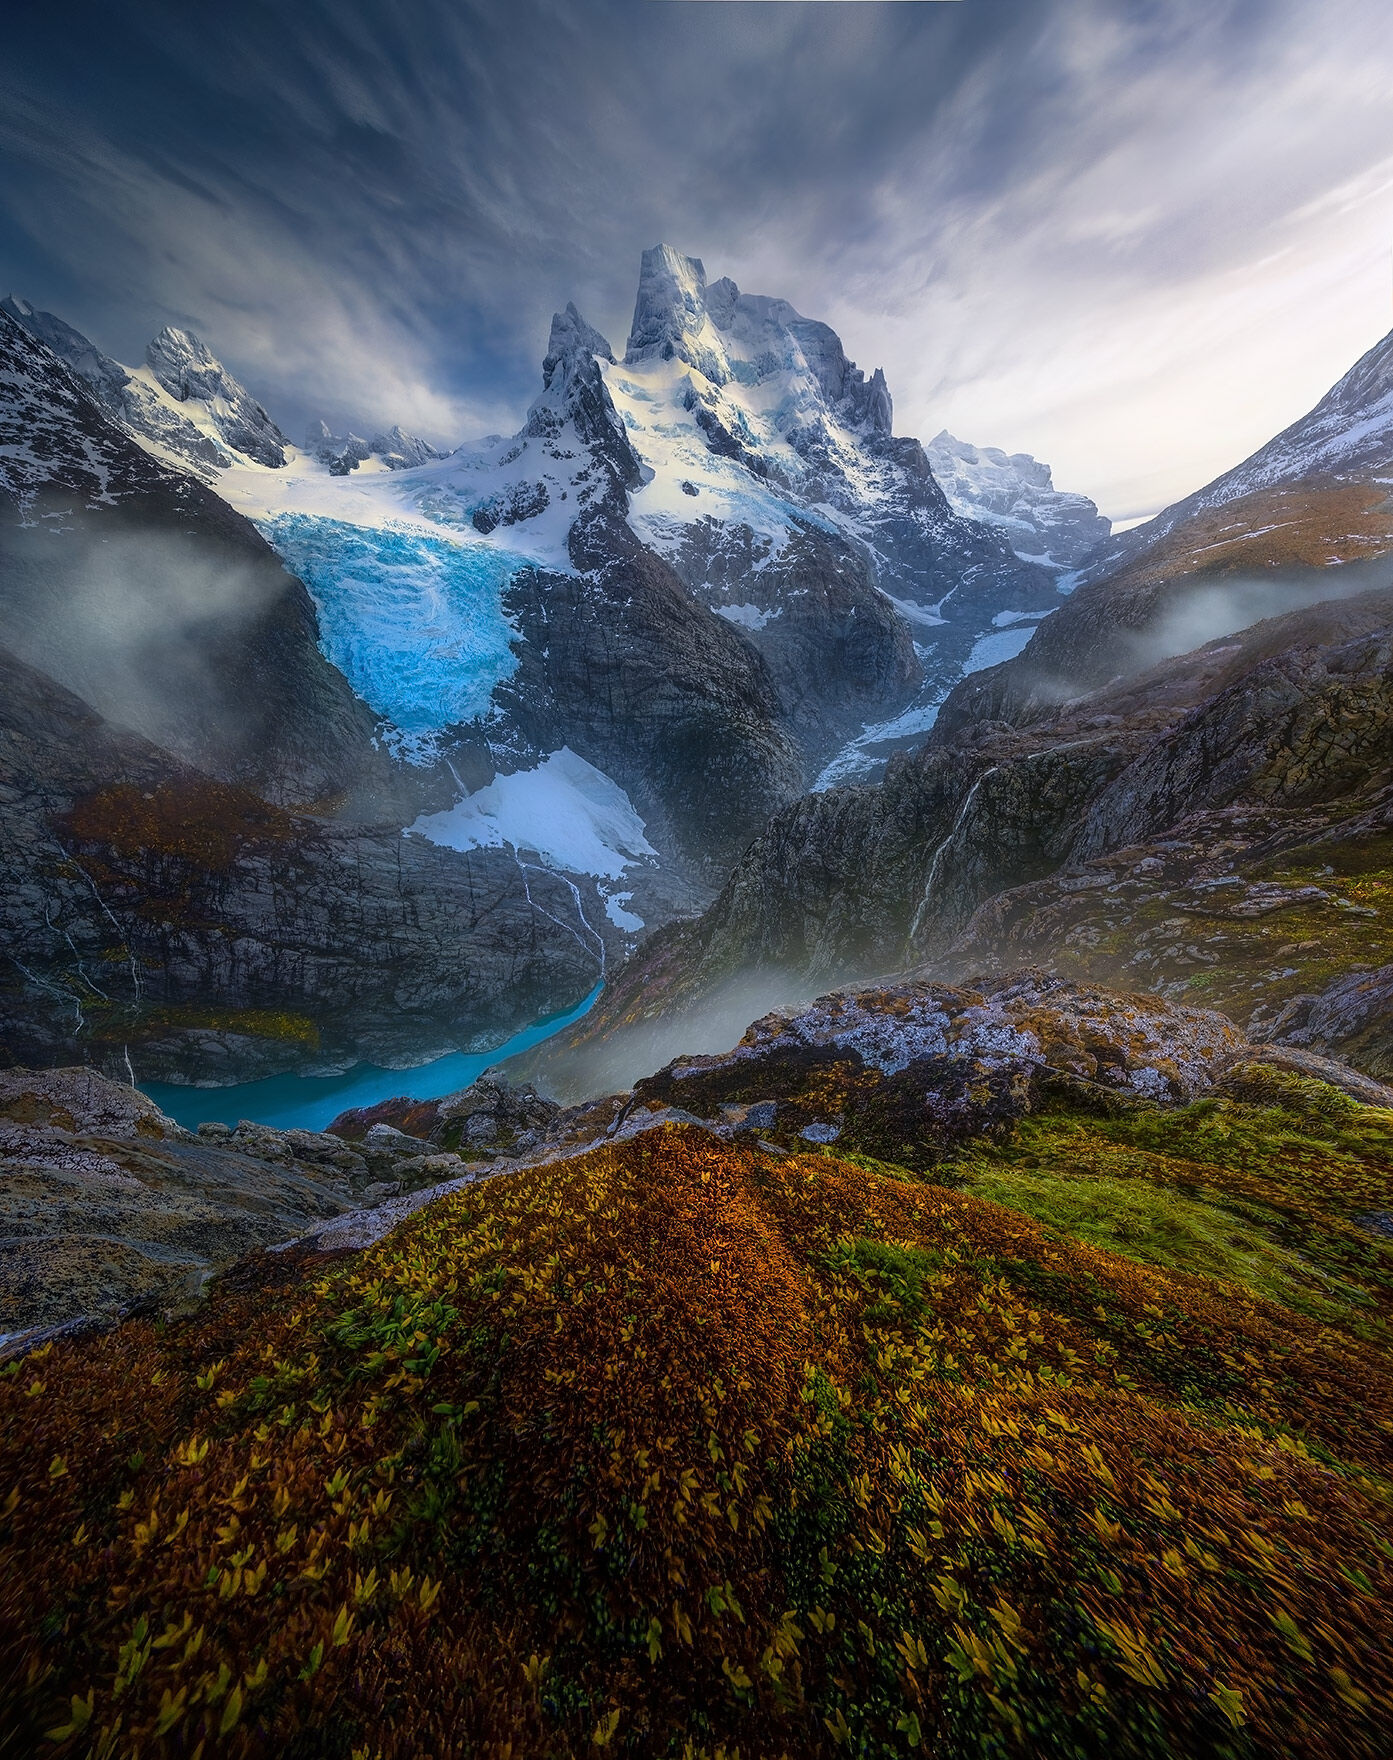 A super wide angle lens shows off dramatic peaks and colorful mosses of the Patagonian Fjords.  In between we see layers of turquoise...